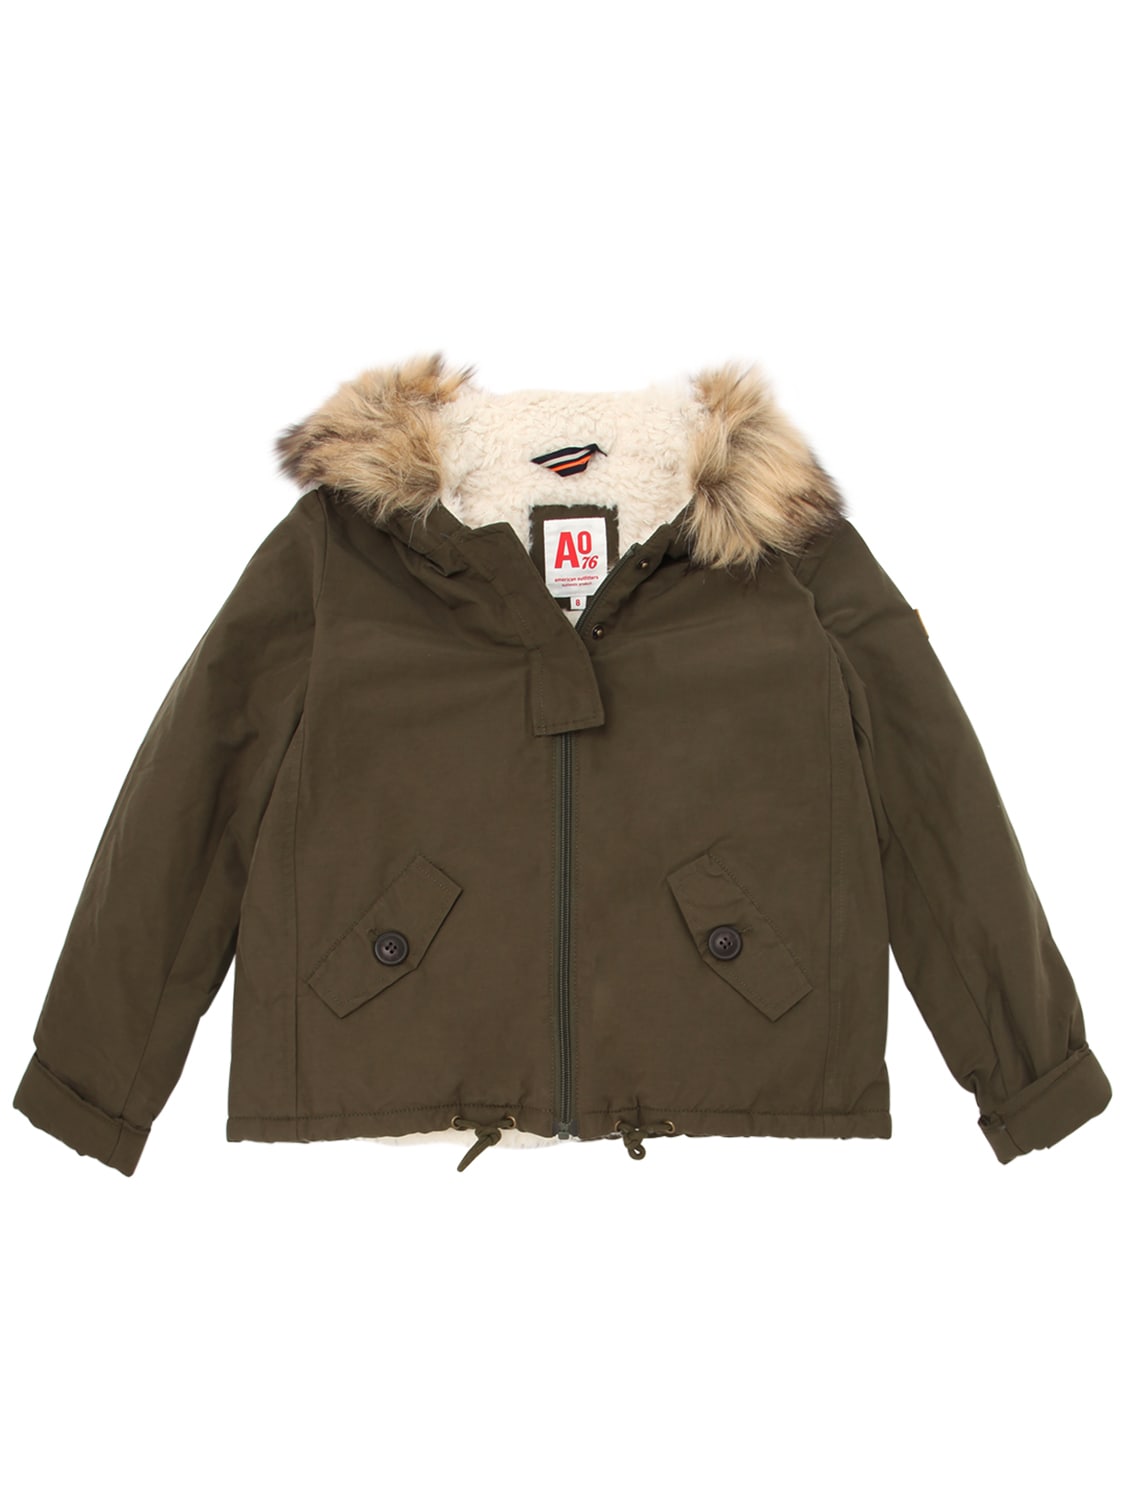 American Outfitters Kids' Cotton Canvas Jacket W/ Faux Fur In Military Green